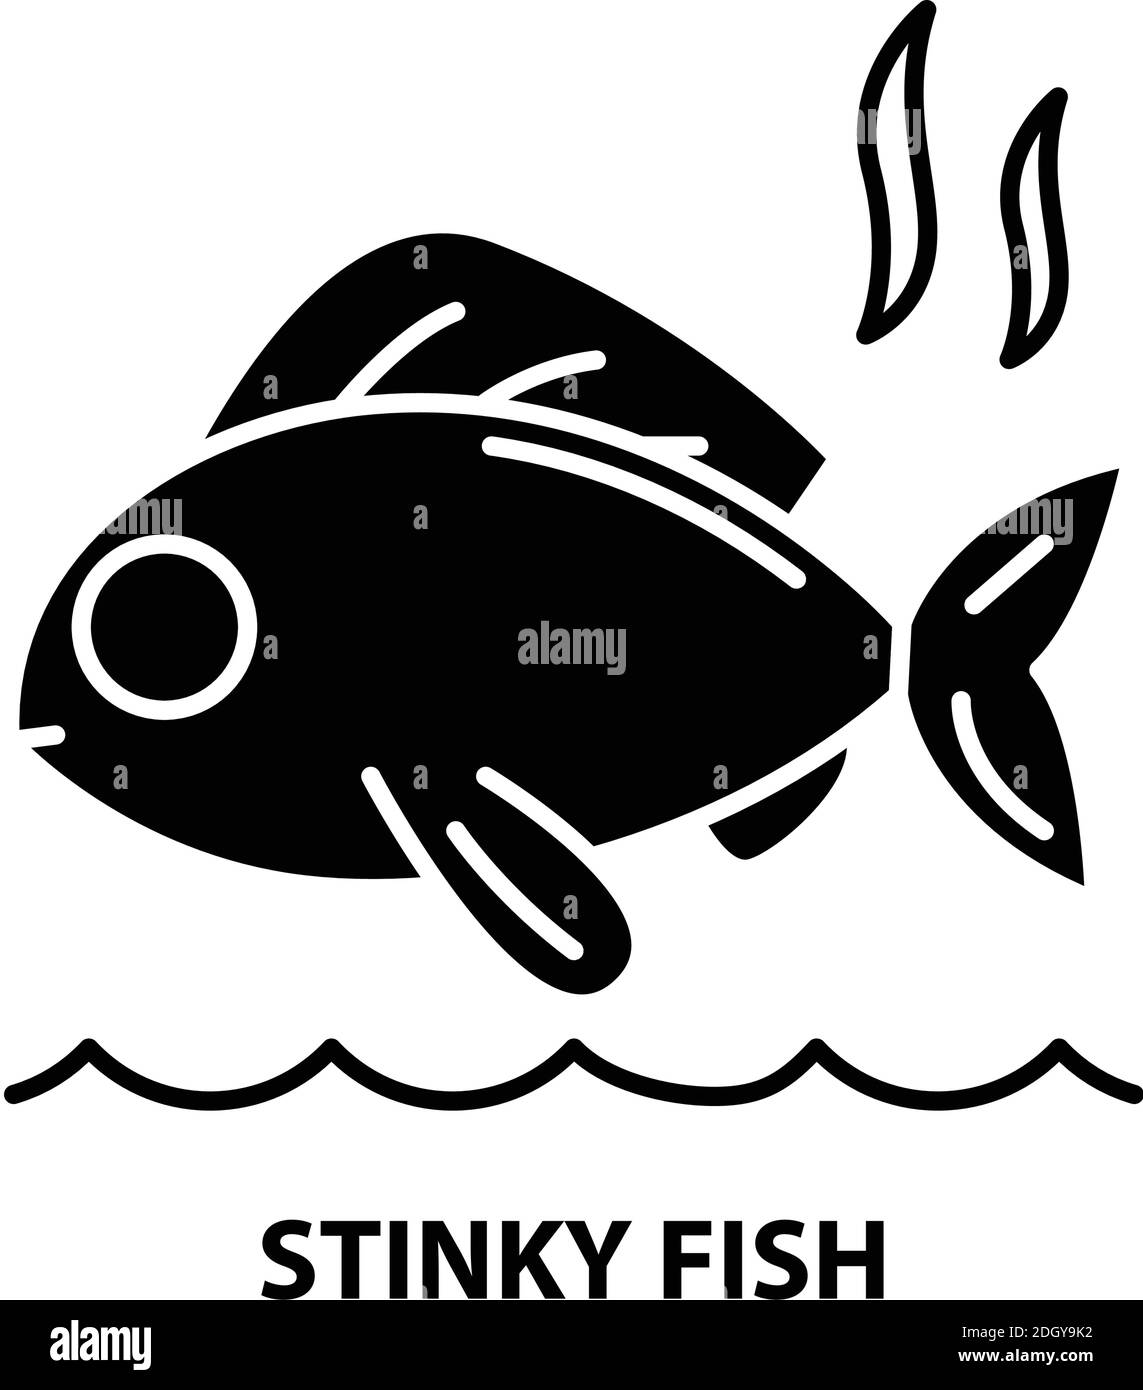 stinky fish icon, black vector sign with editable strokes, concept